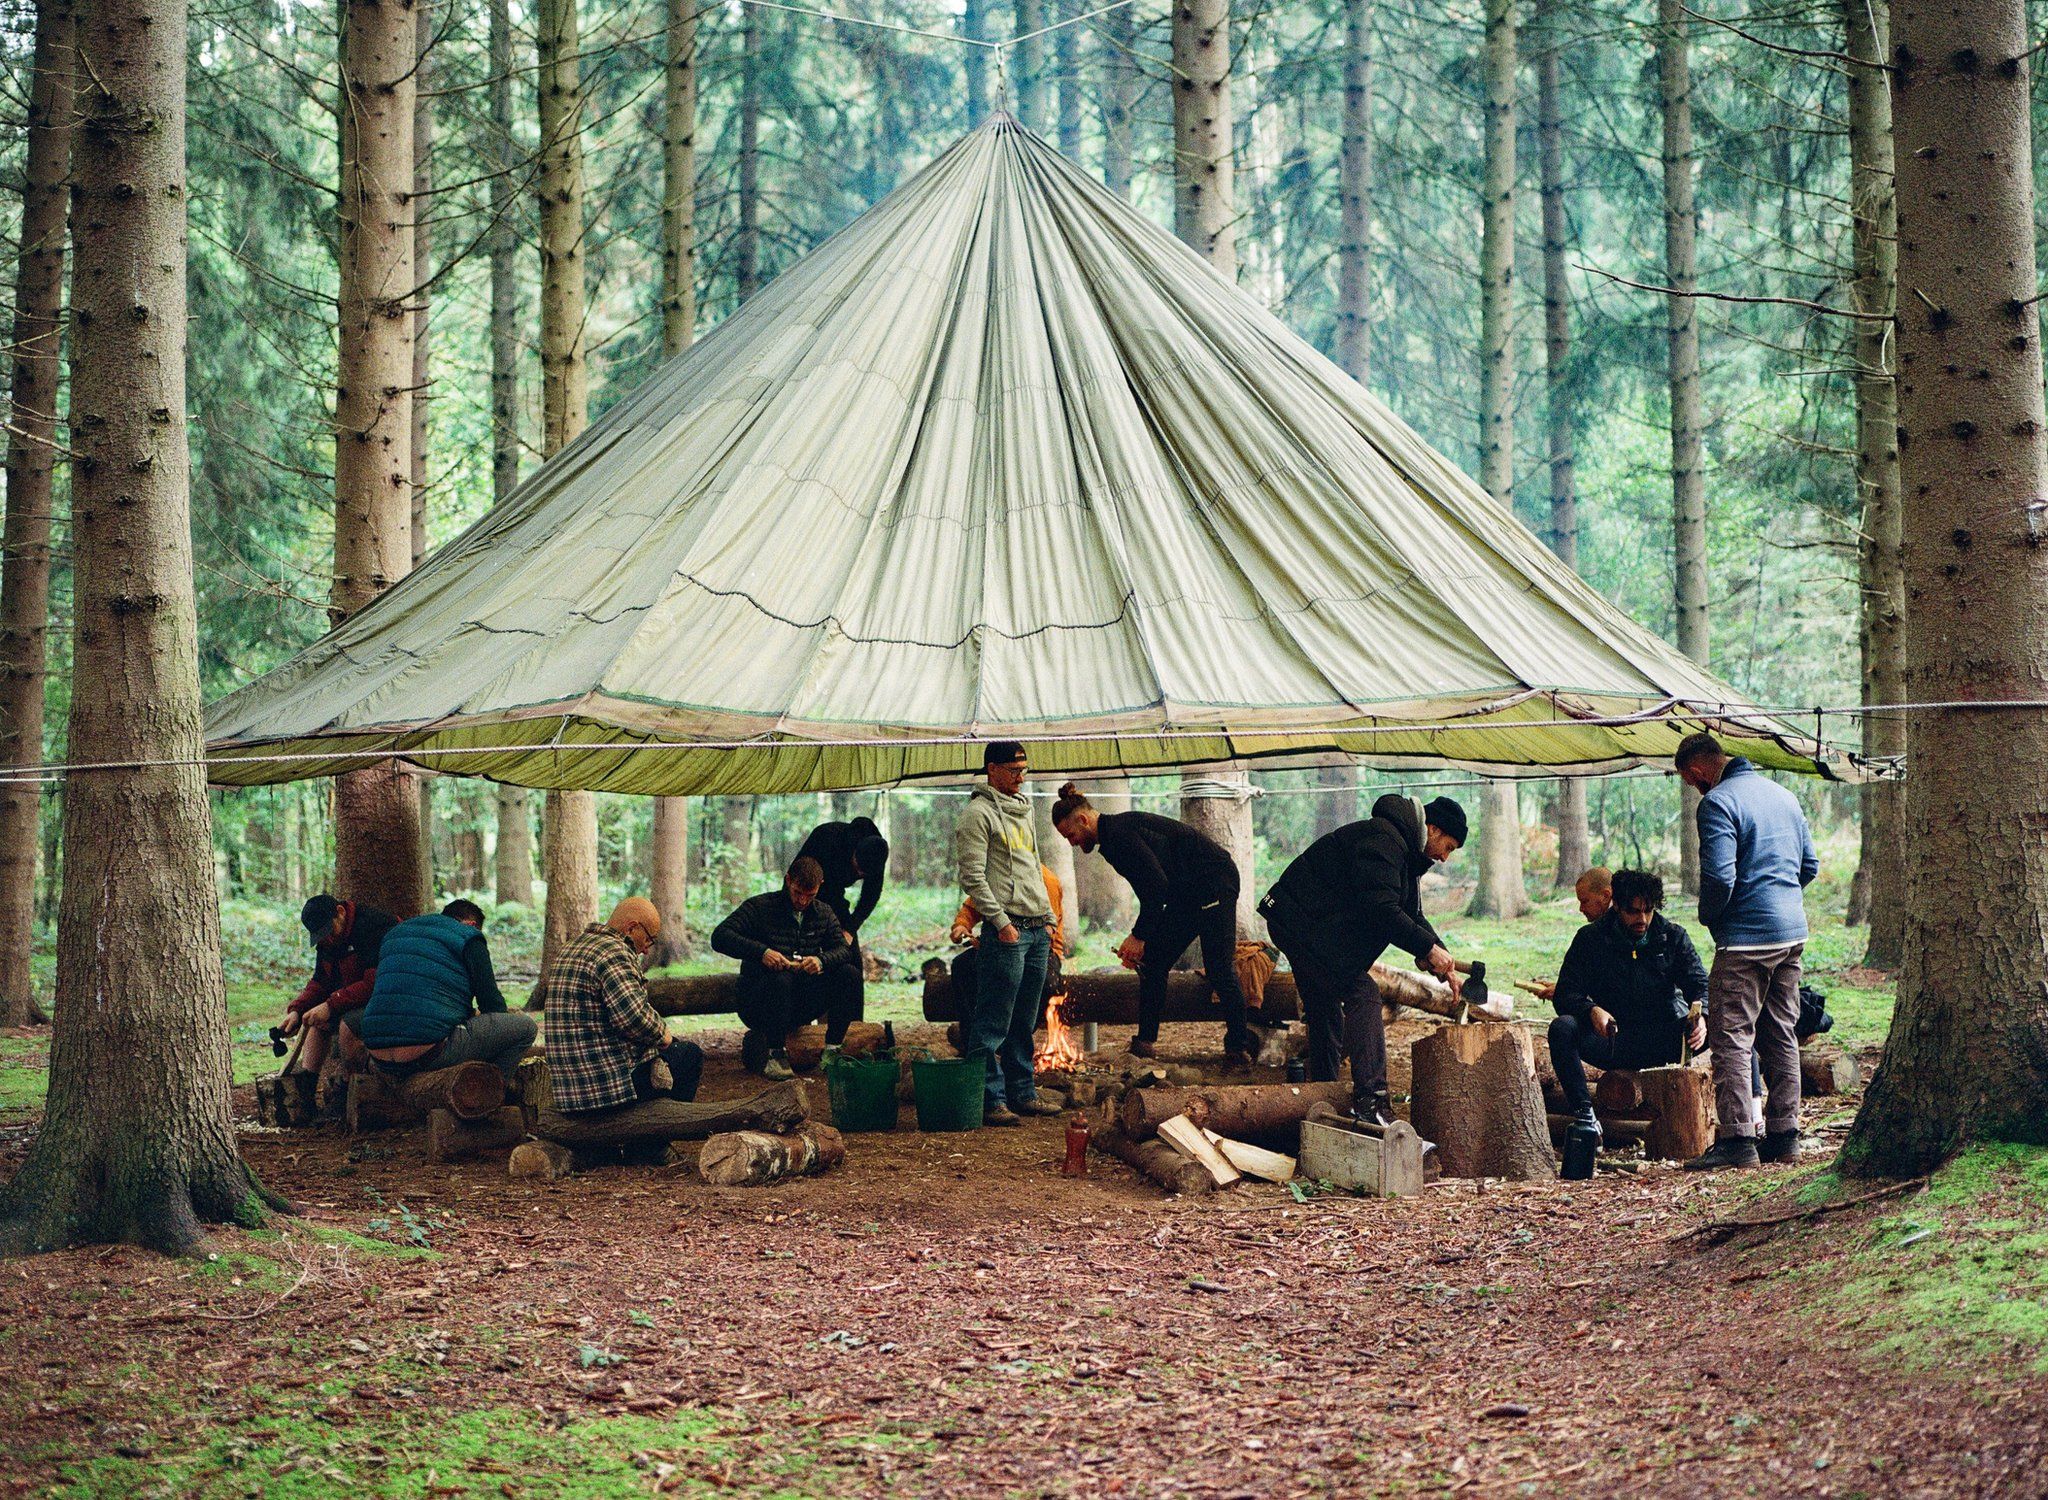 A group of men congregate under a canopy